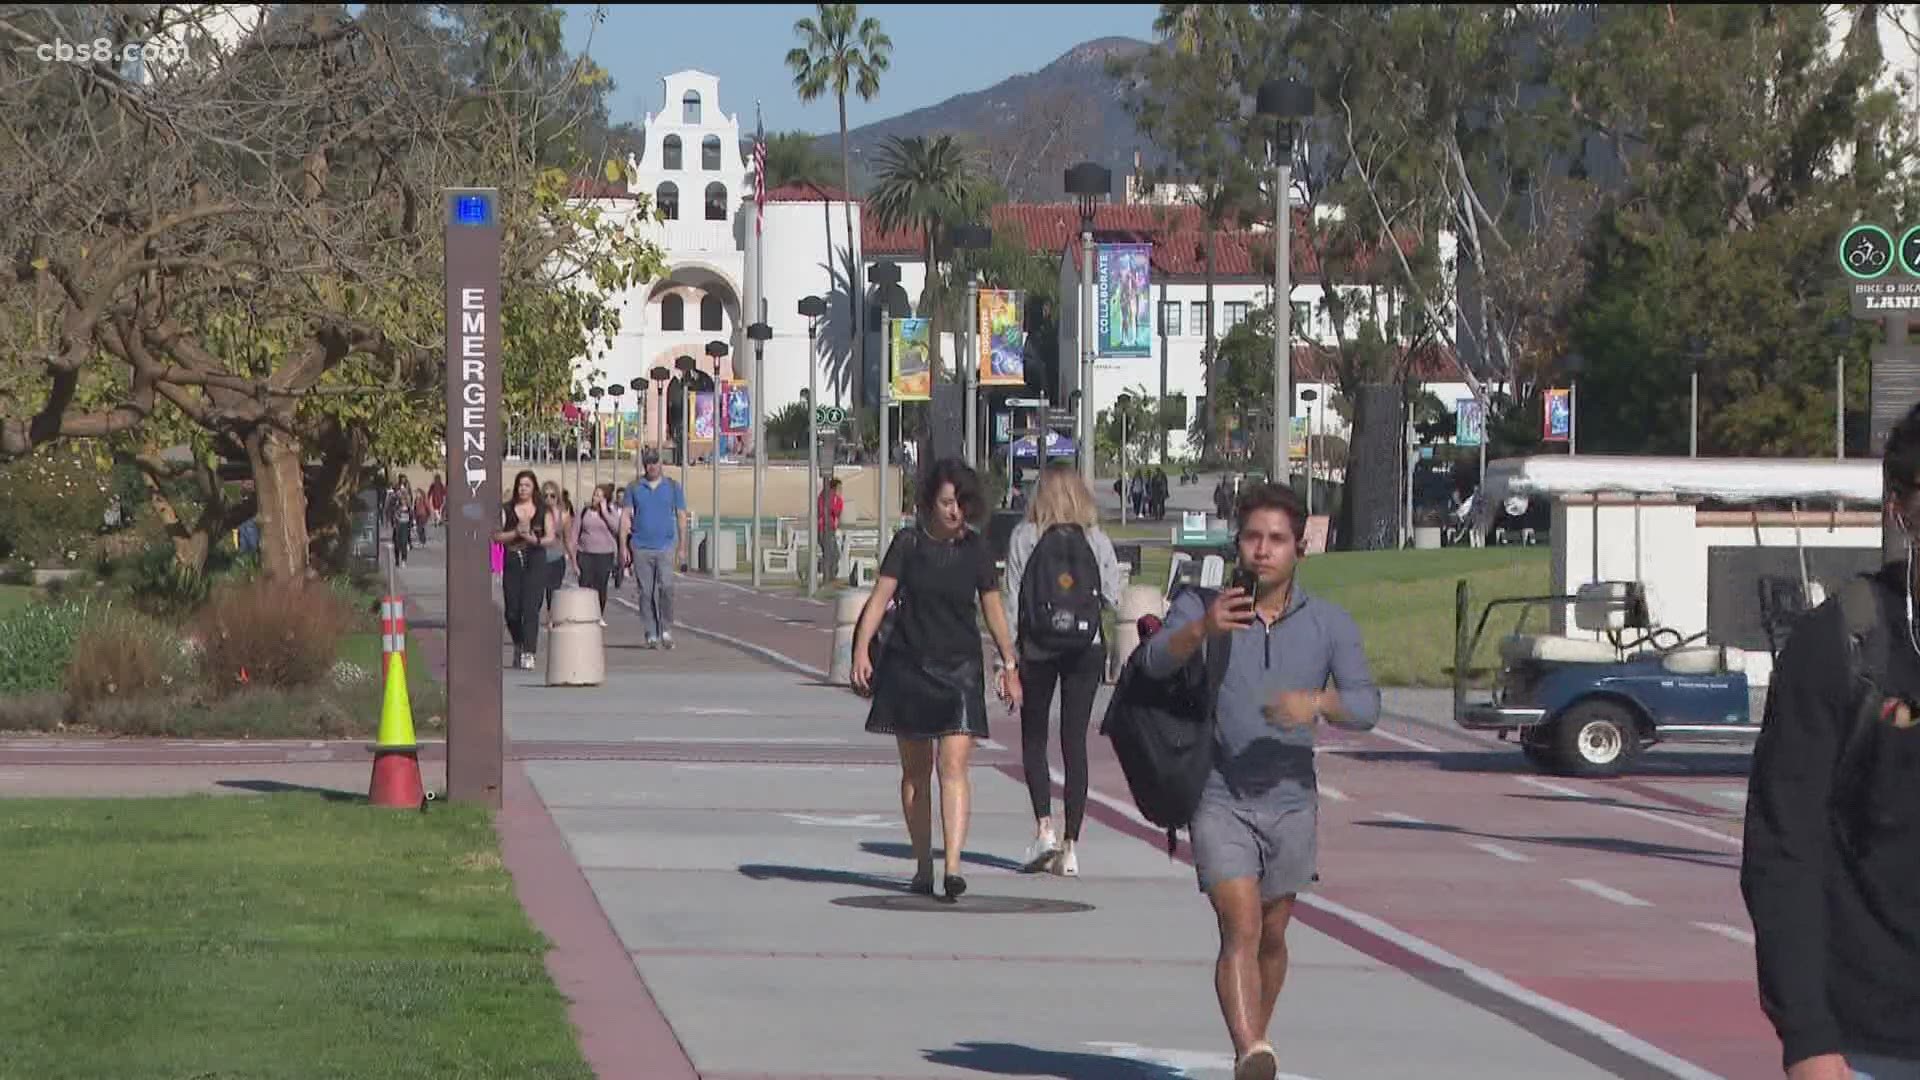 SDSU said Wednesday afternoon that 64 students have tested positive for the virus since the start of the semester. All classes will go online for four weeks.